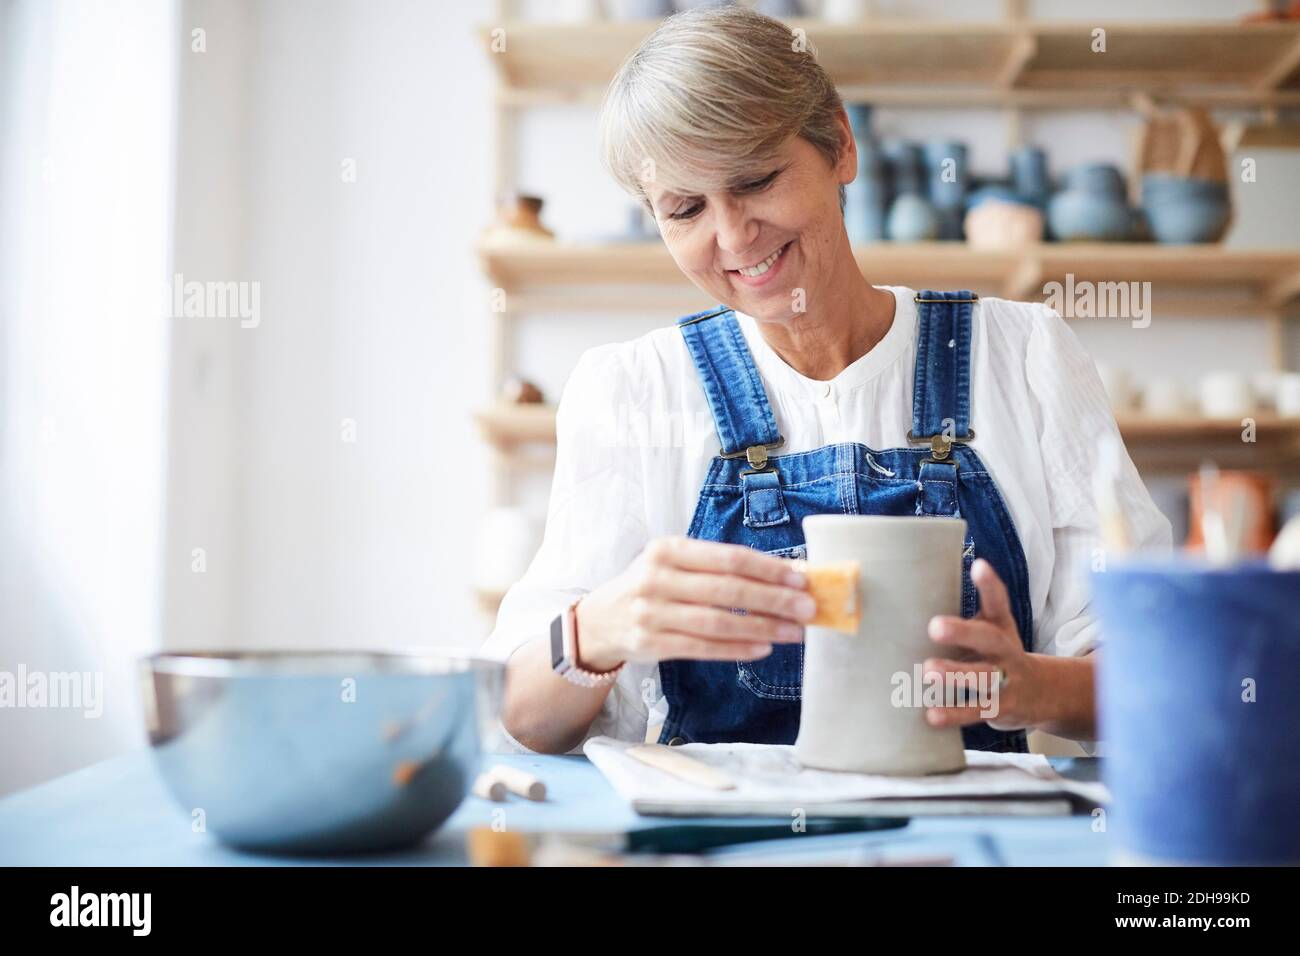 Smiling mature woman learning pottery in art class Stock Photo